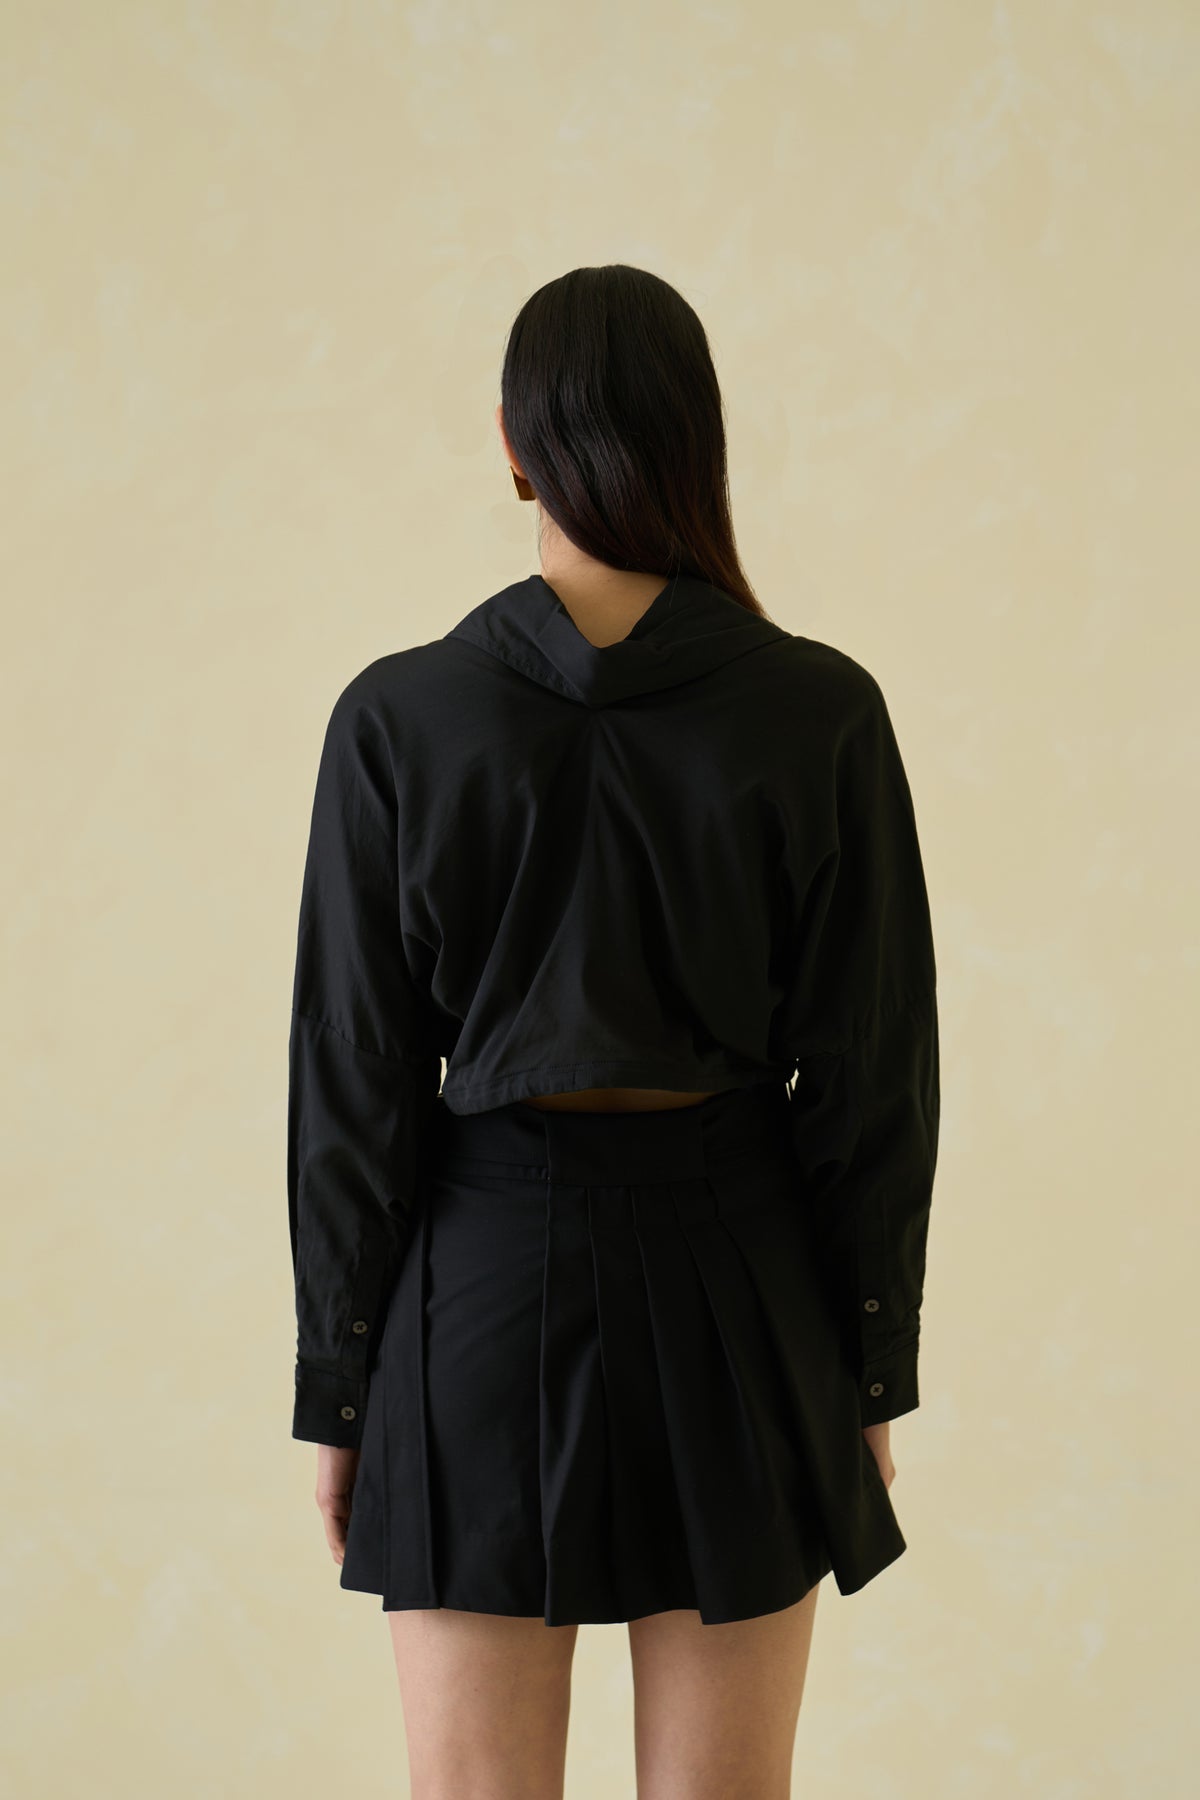 Moonless Night Directional Cropped Shirt